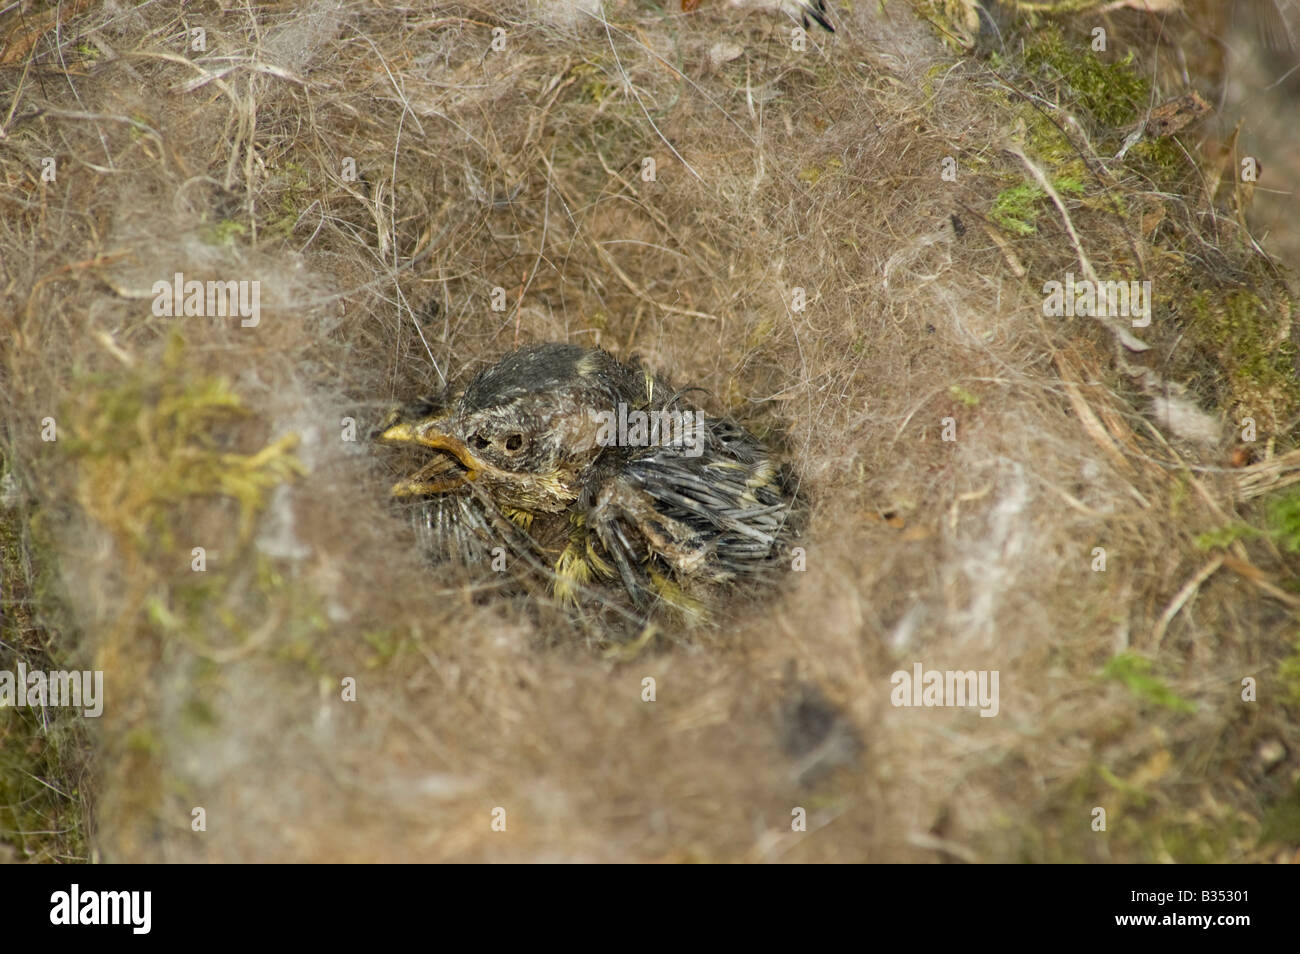 Dead young Wren, in Nest containing moss, hair and string Stock Photo